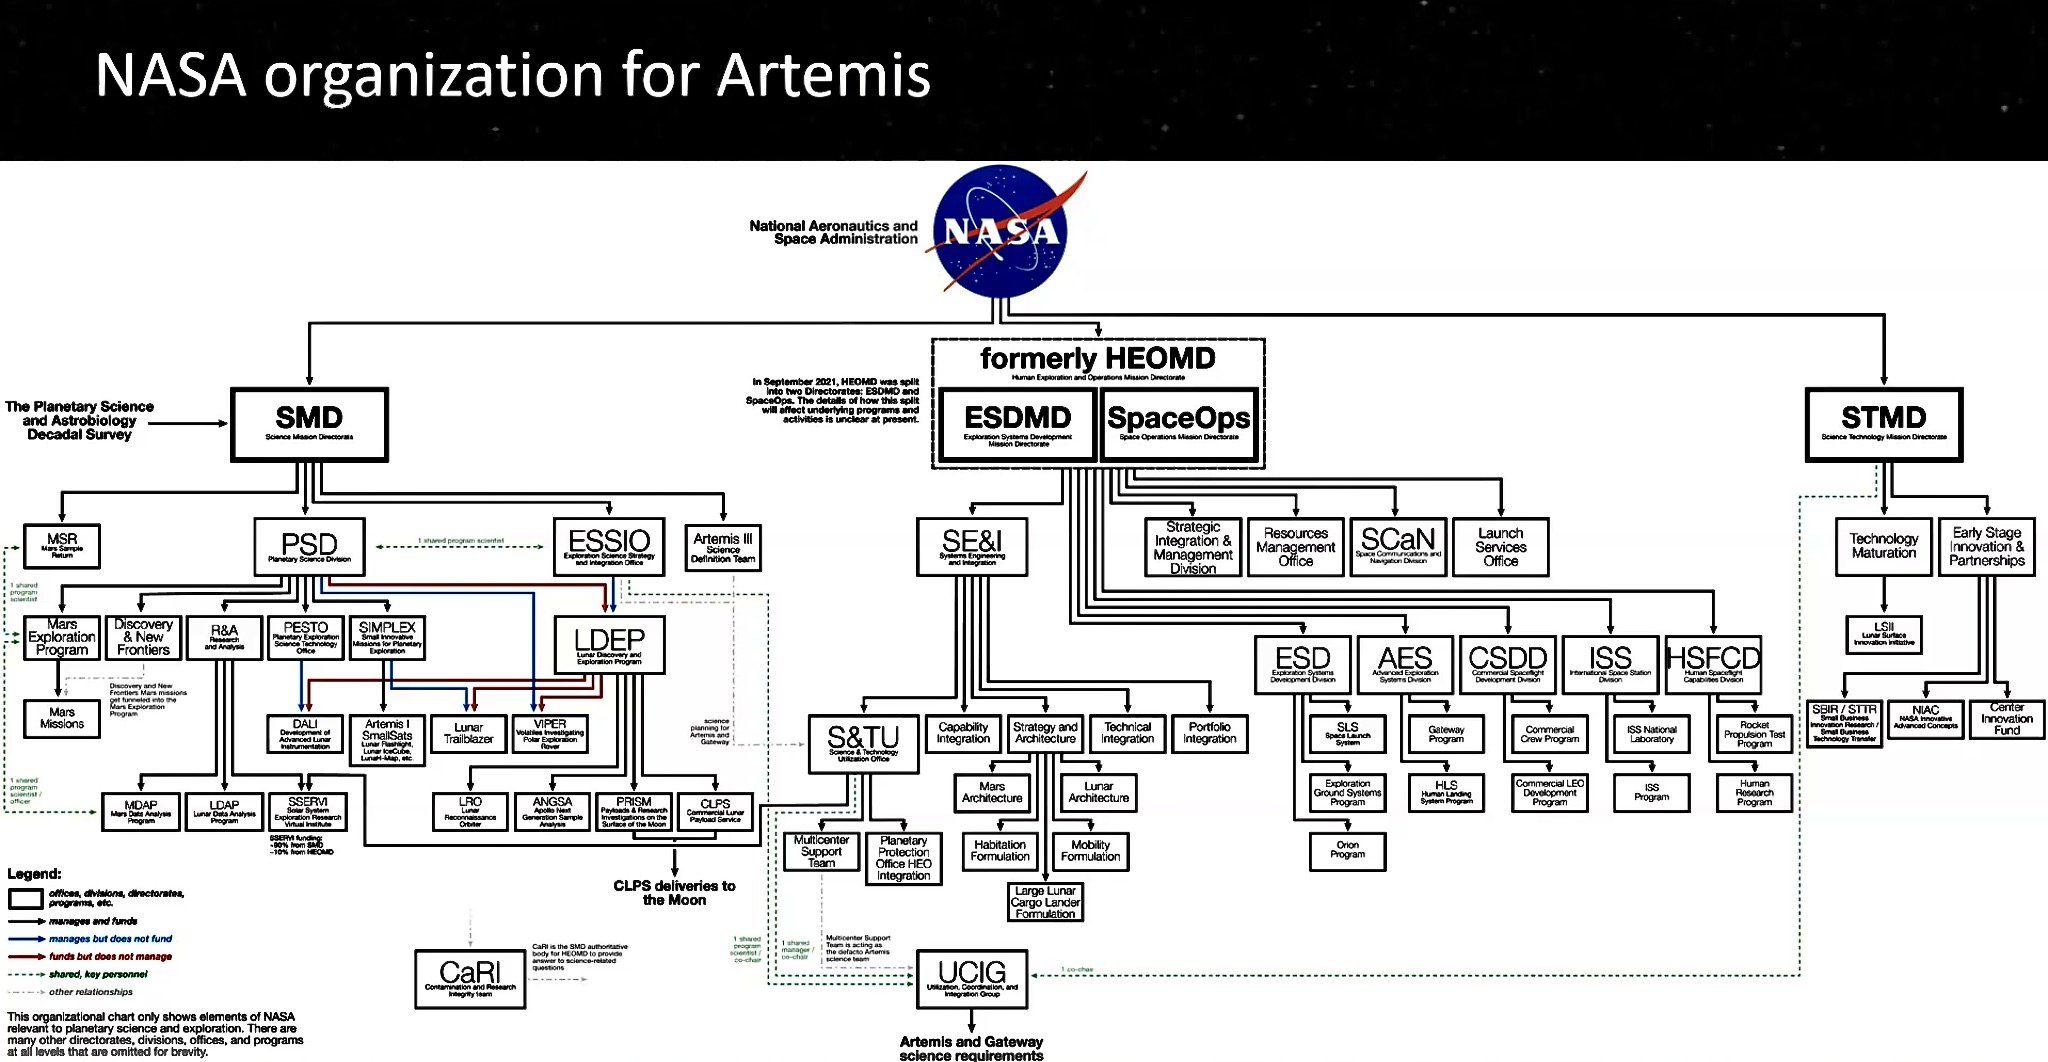 A chart showing the organizational structure of NASA's Artemis program.